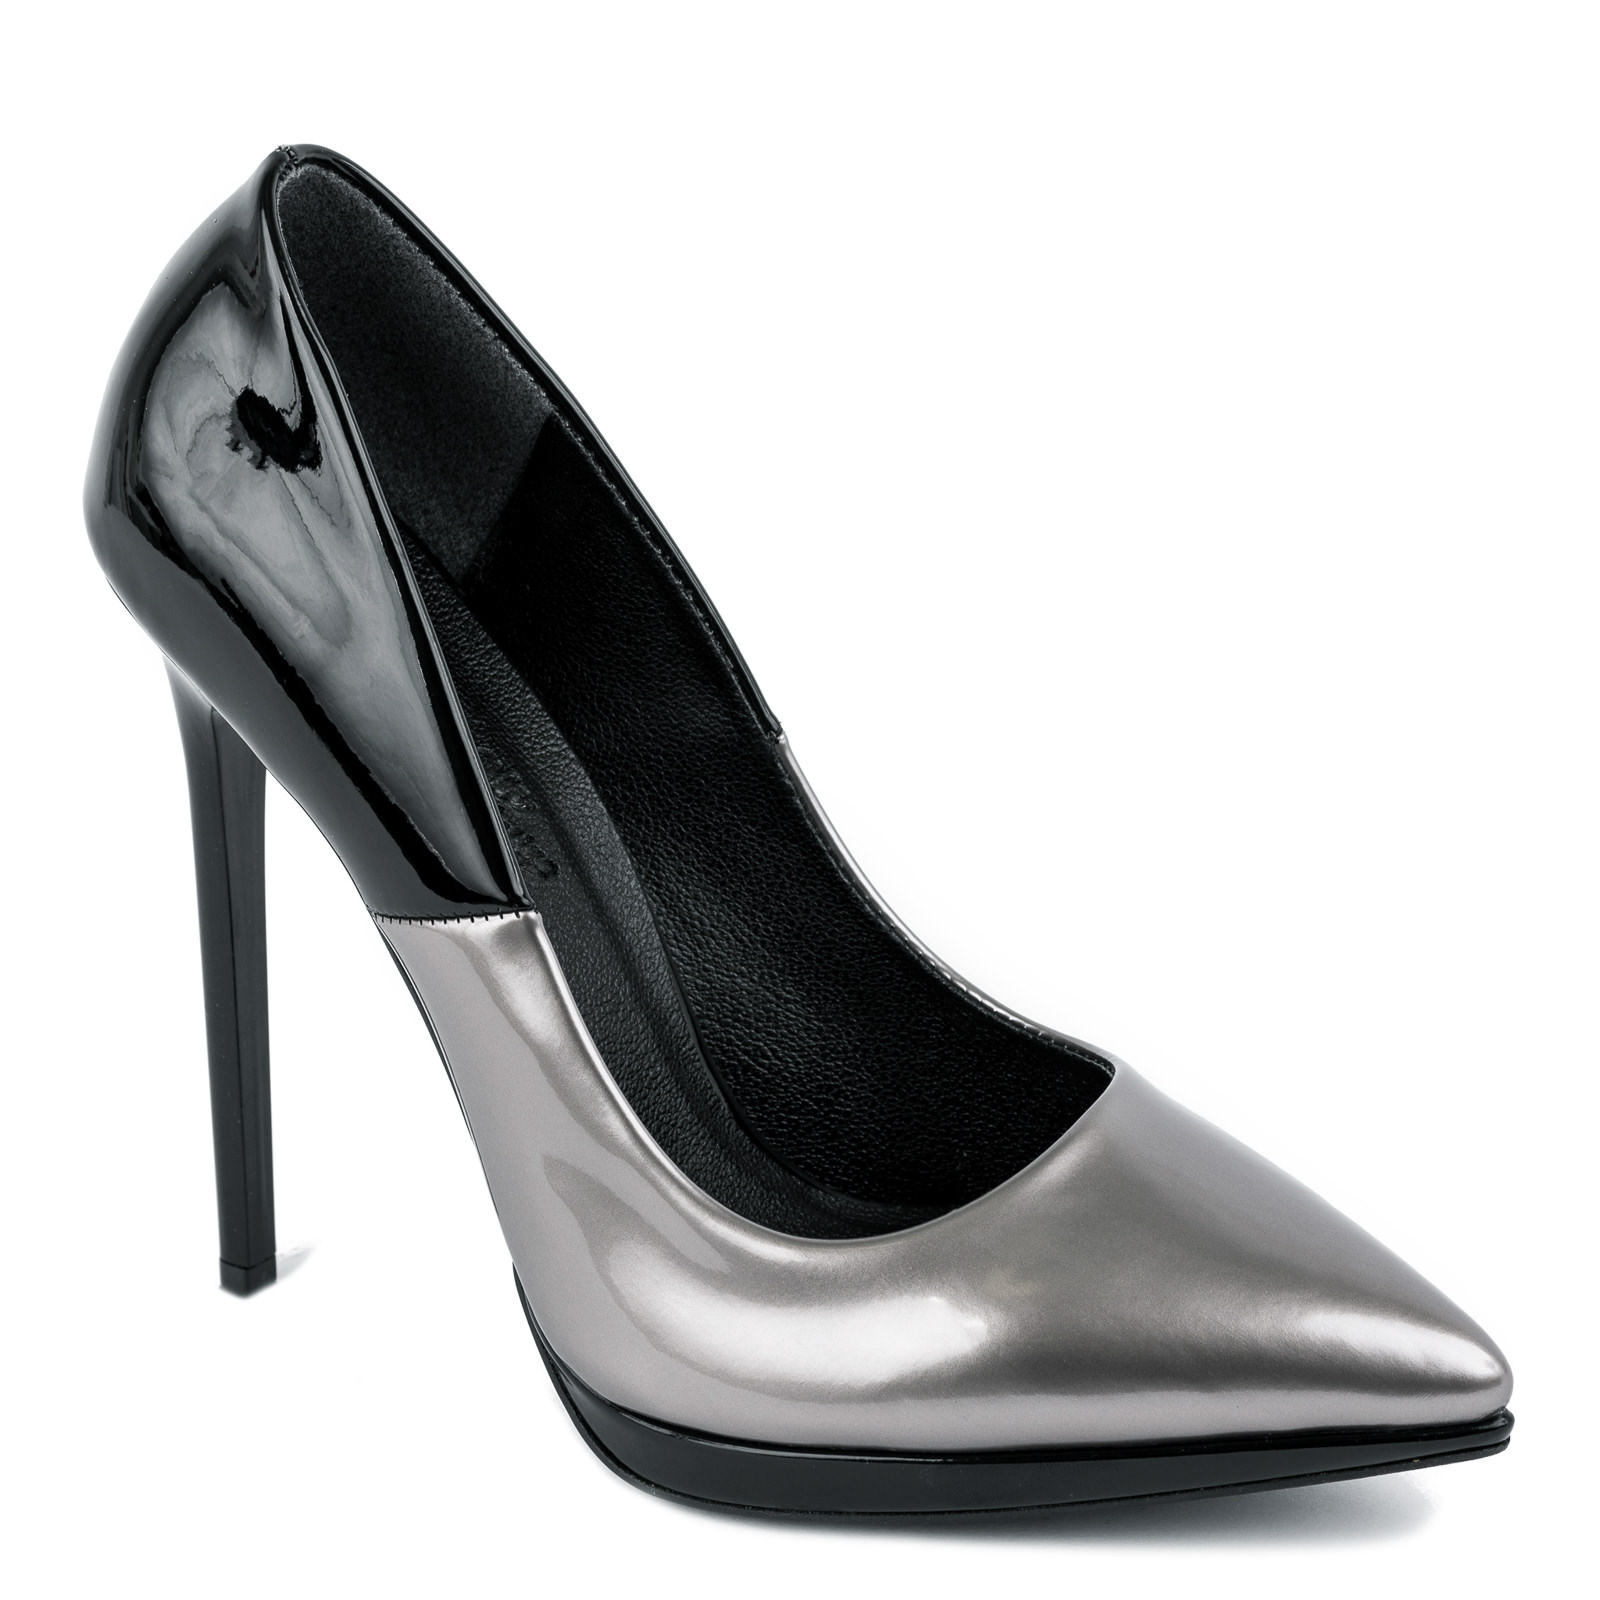 POINTED STILETTO SHOES WITH THIN HEEL - BLACK/GRAPHITE